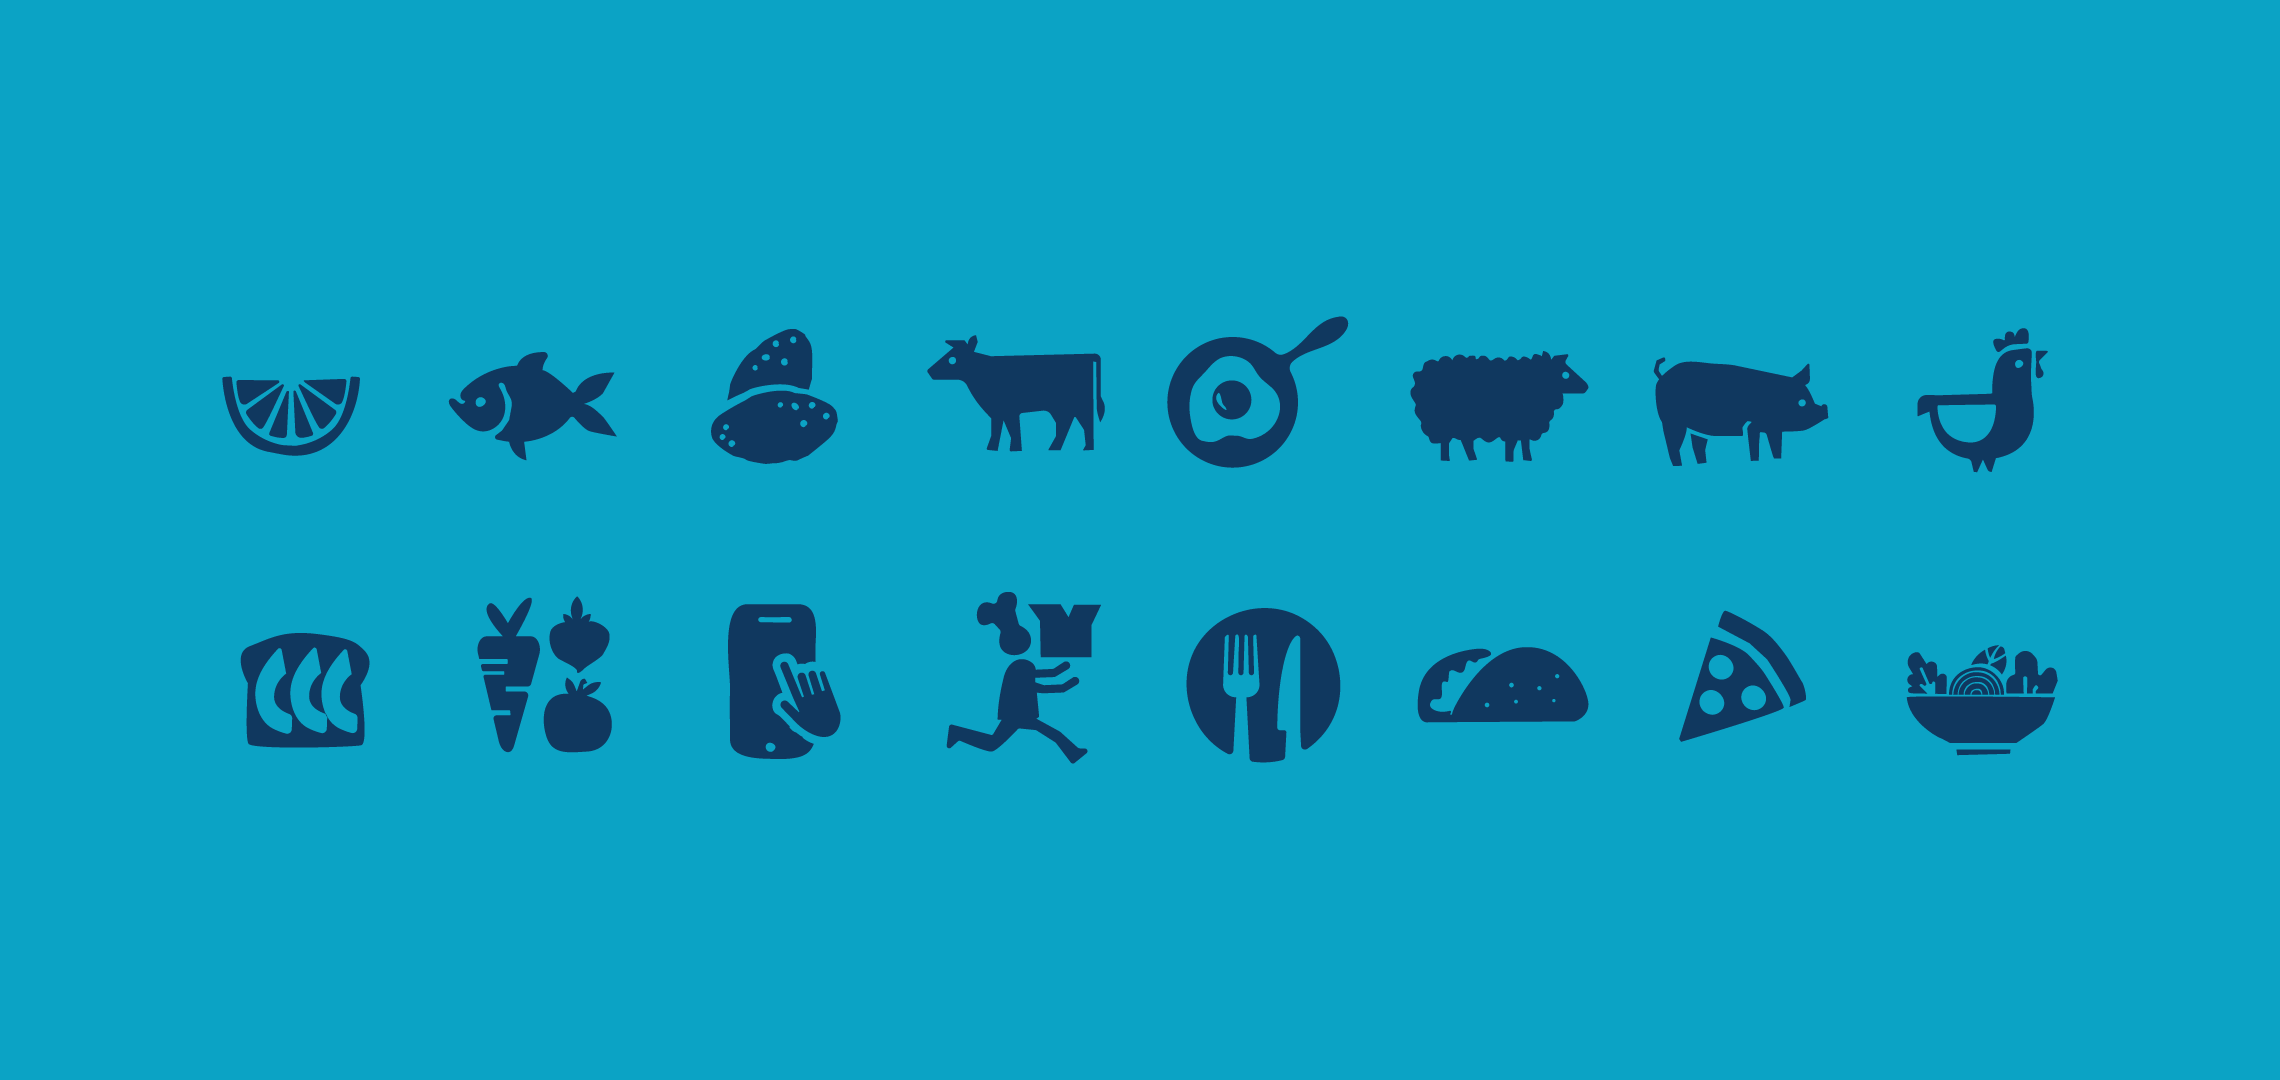 Icon graphics for a meal delivery service.